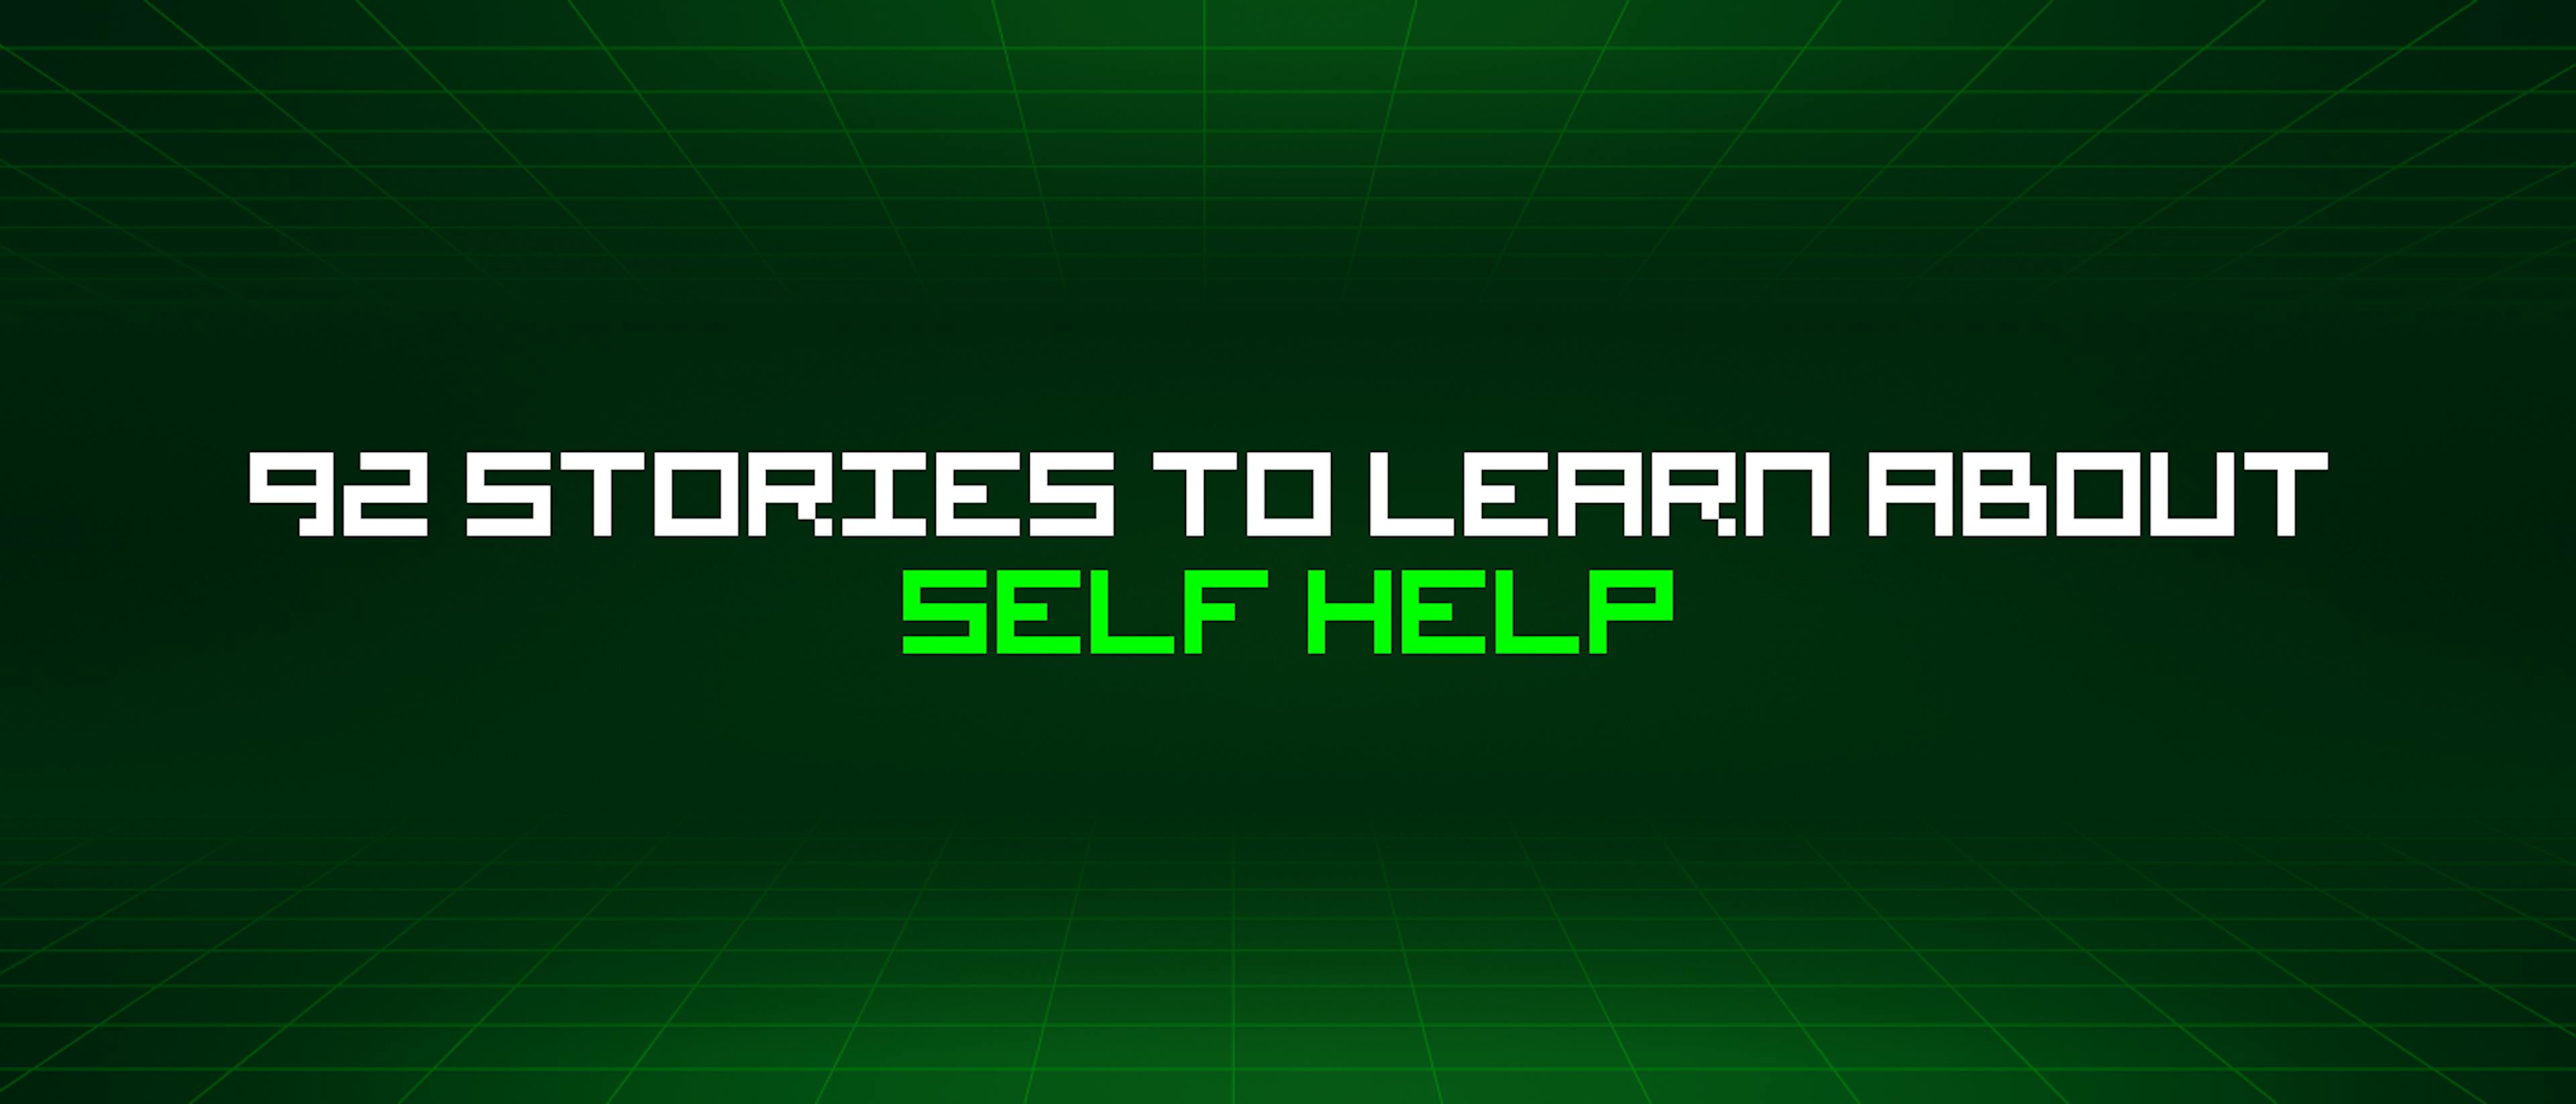 featured image - 92 Stories To Learn About Self Help